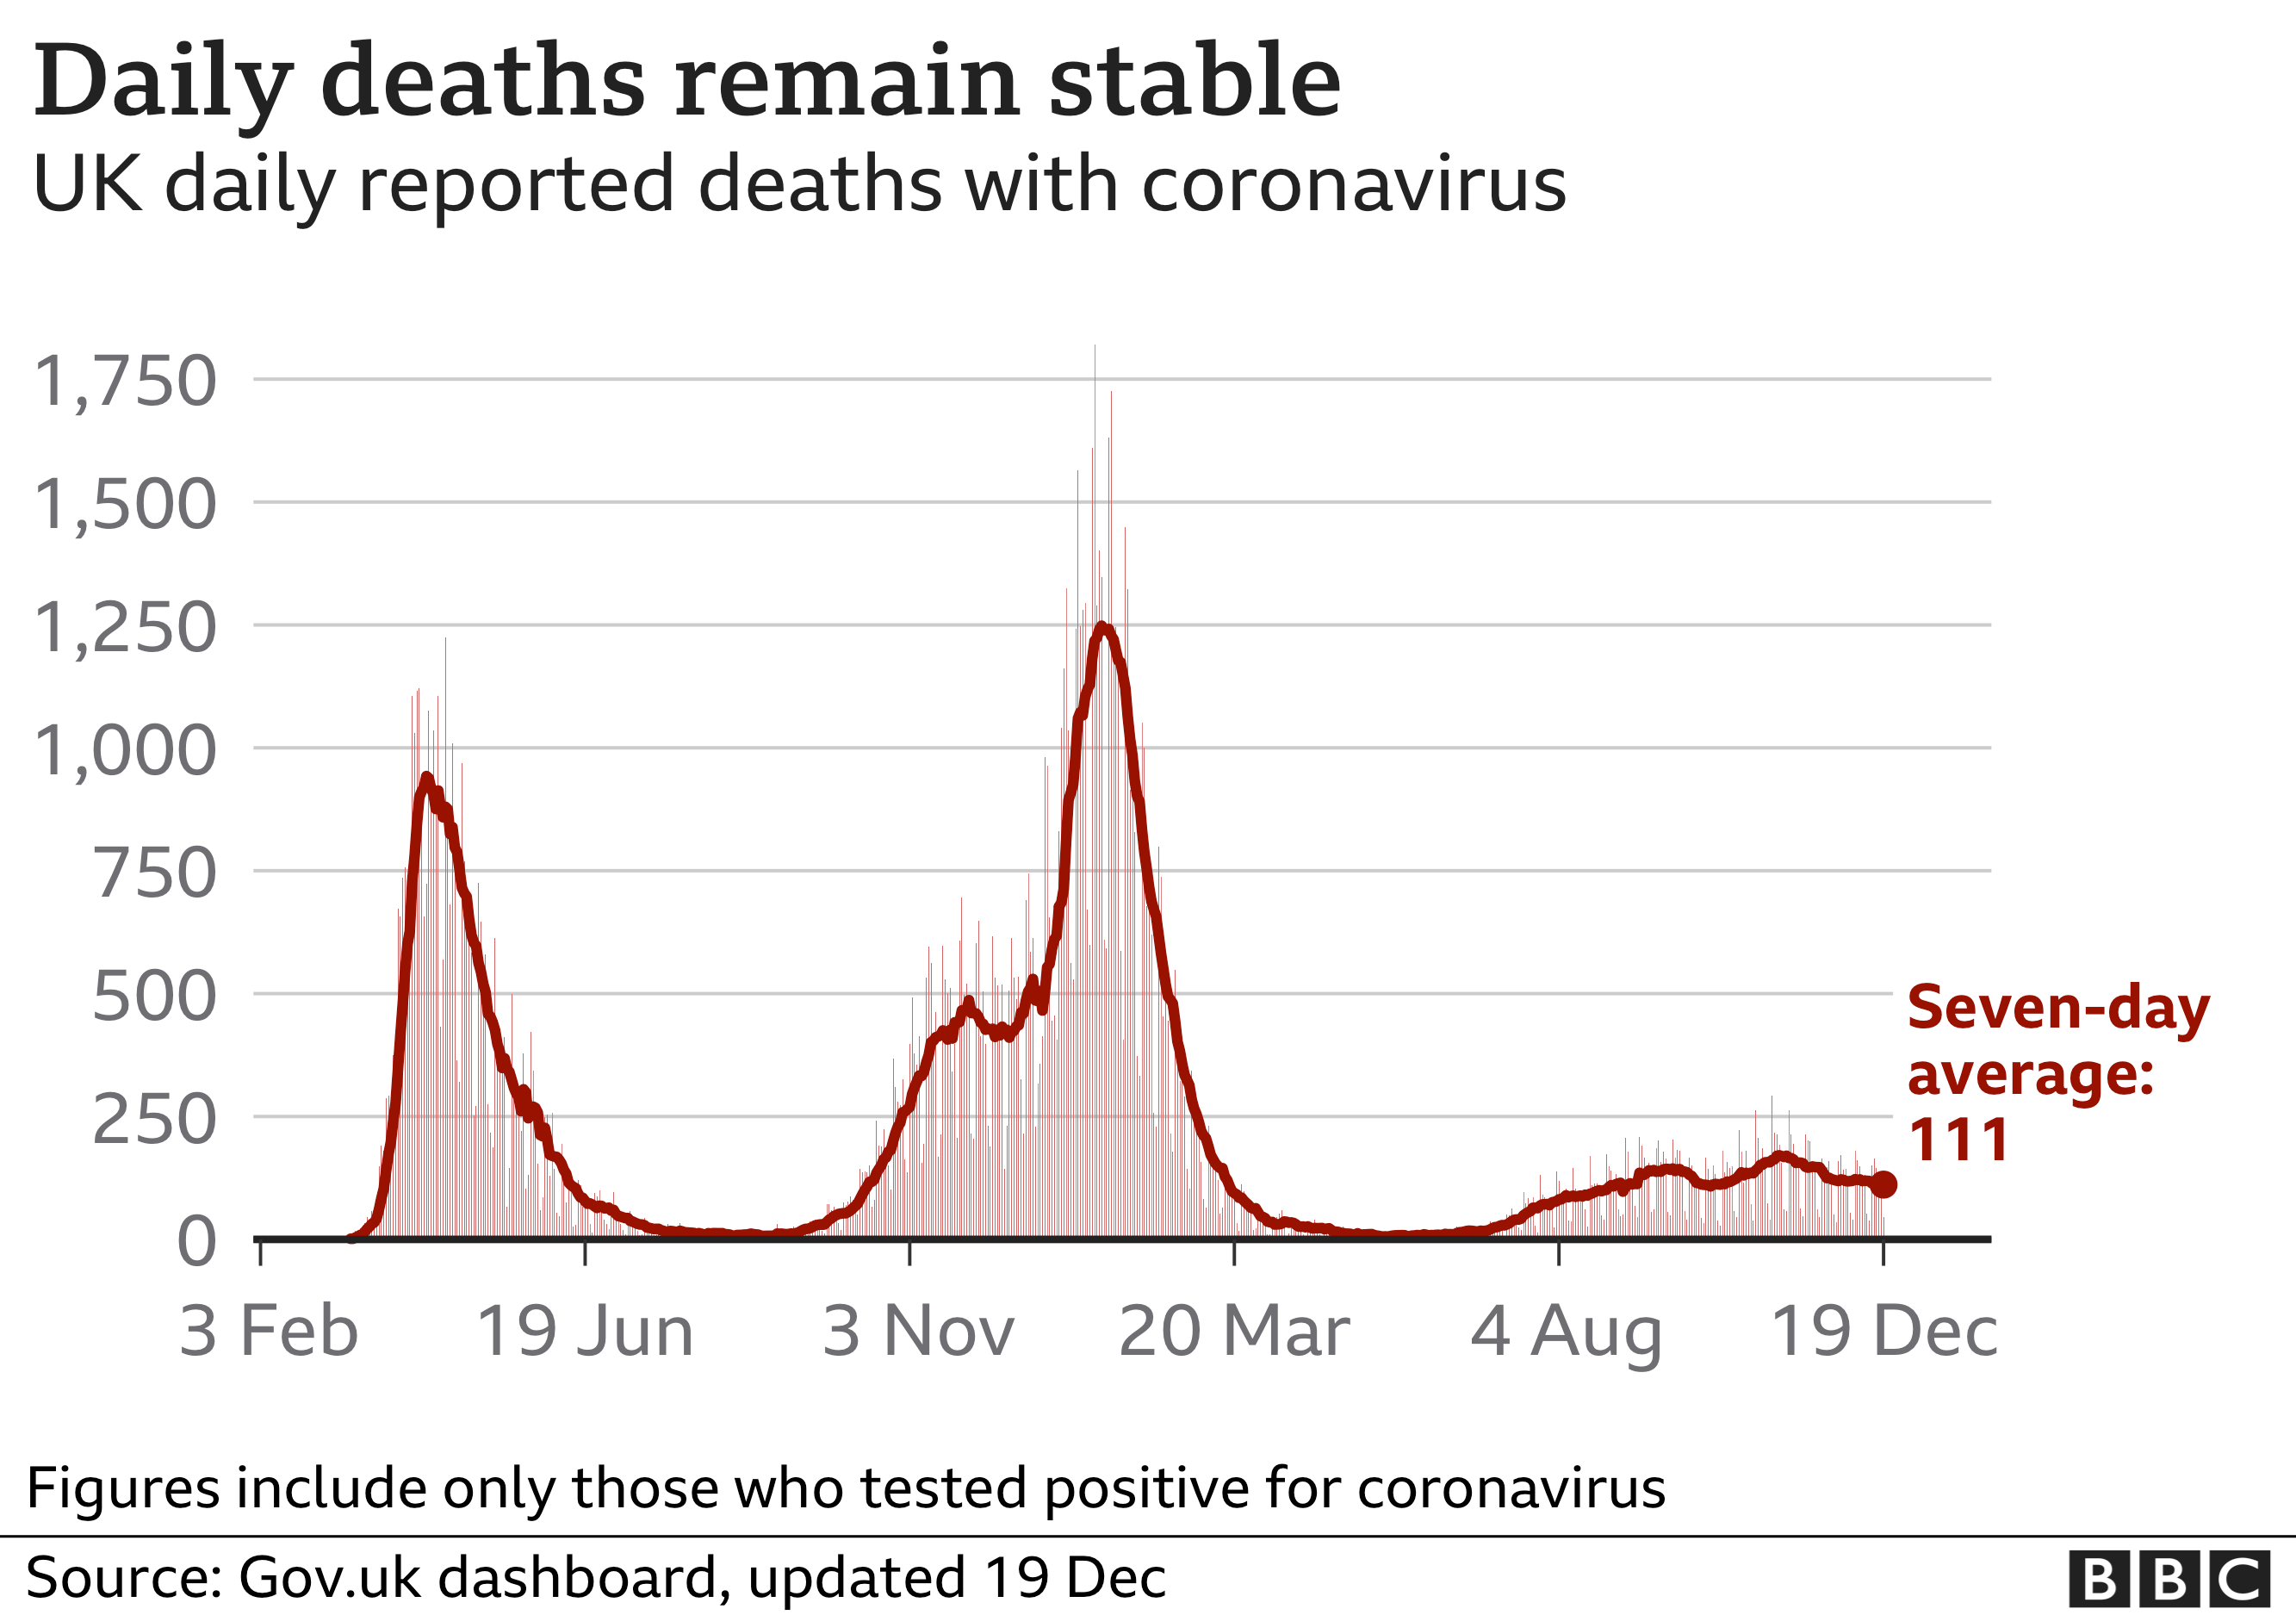 Deaths remain stable